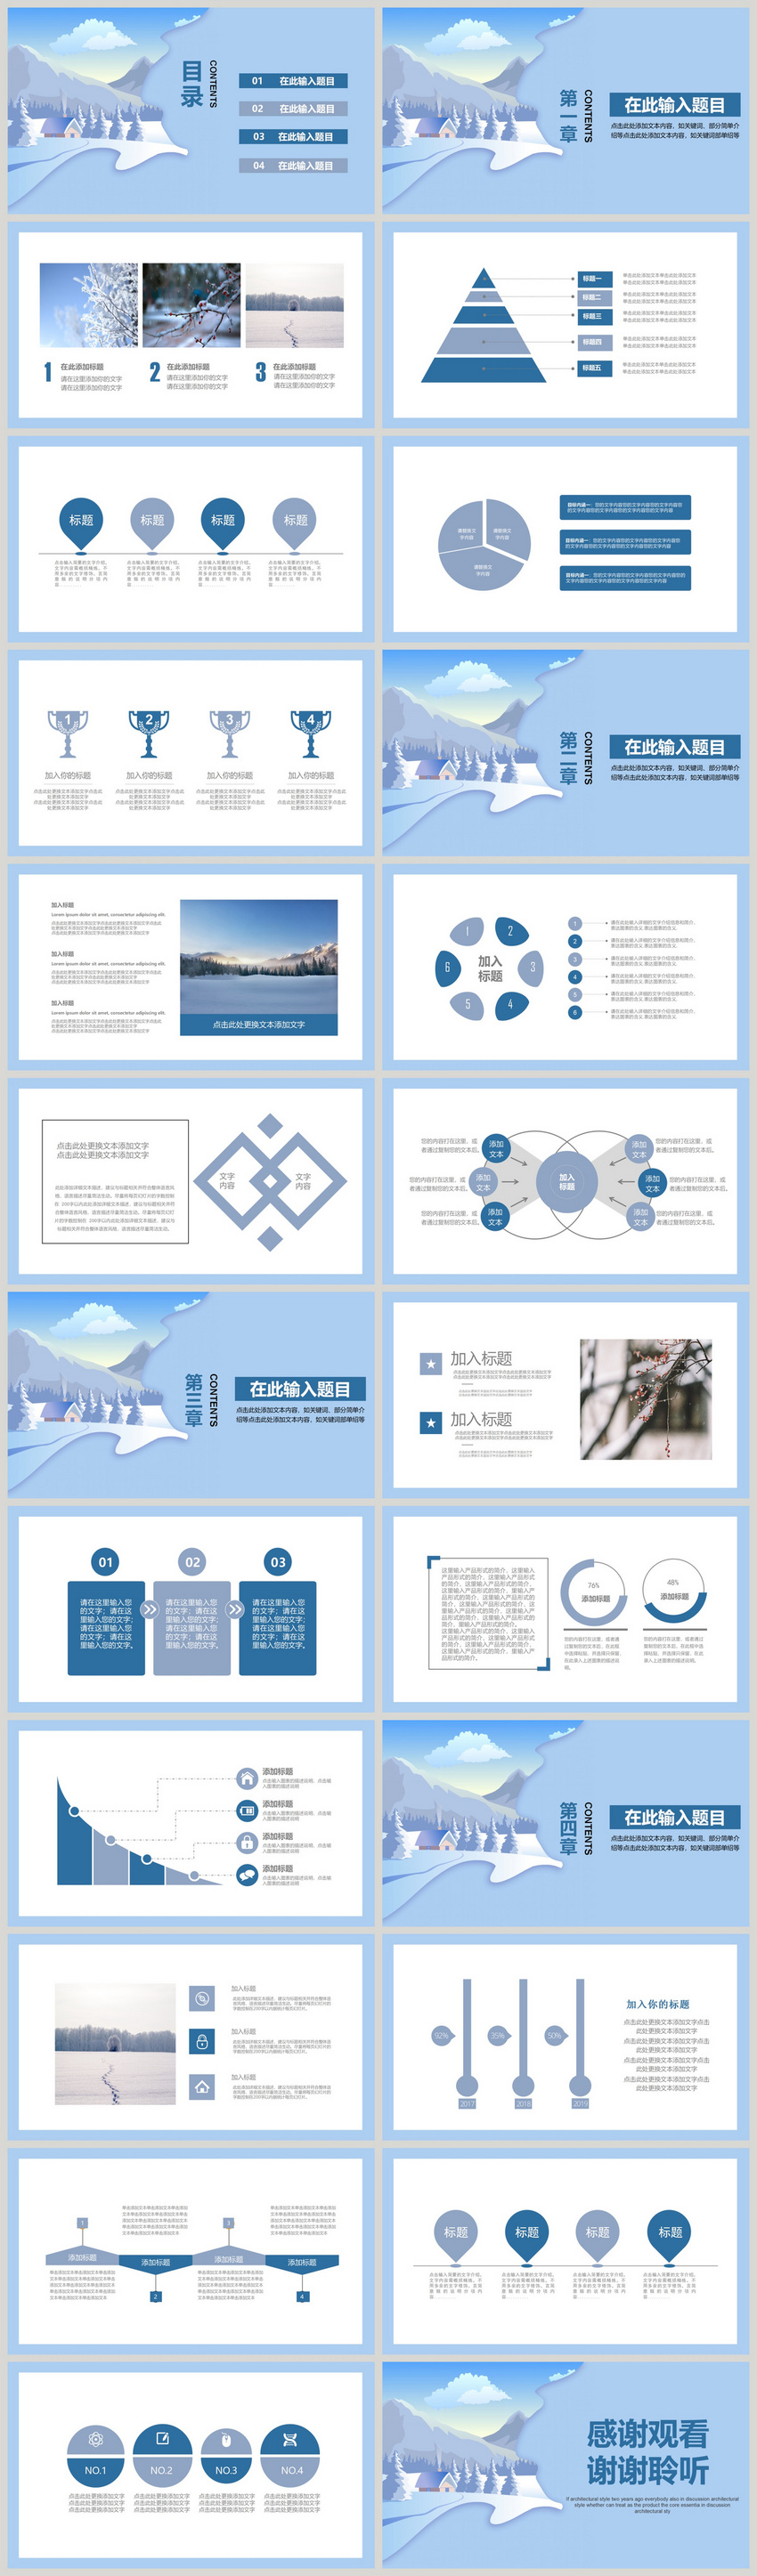 Ppt aesthetic template download Free Chemistry